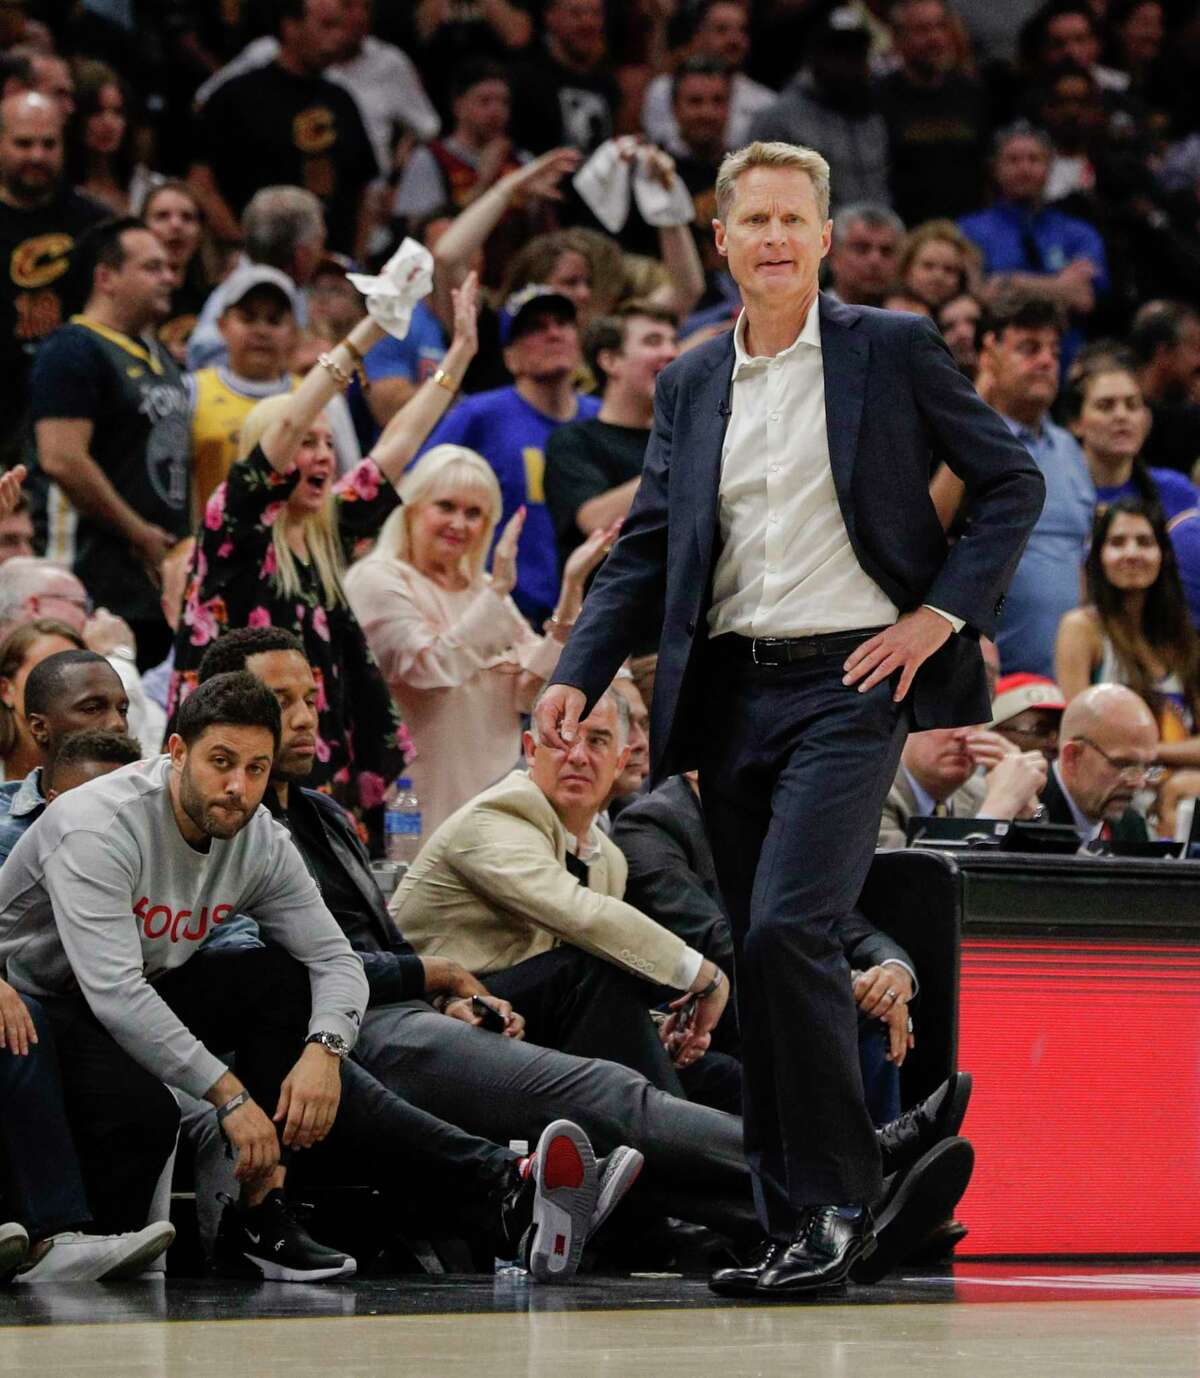 Golden State Warriors' head coach Steve Kerr reacts in the second quarter during game 4 of The NBA Finals between the Golden State Warriors and the Cleveland Cavaliers at Quicken Loans Arena on Friday, June 8, 2018 in Cleveland, Ohio.